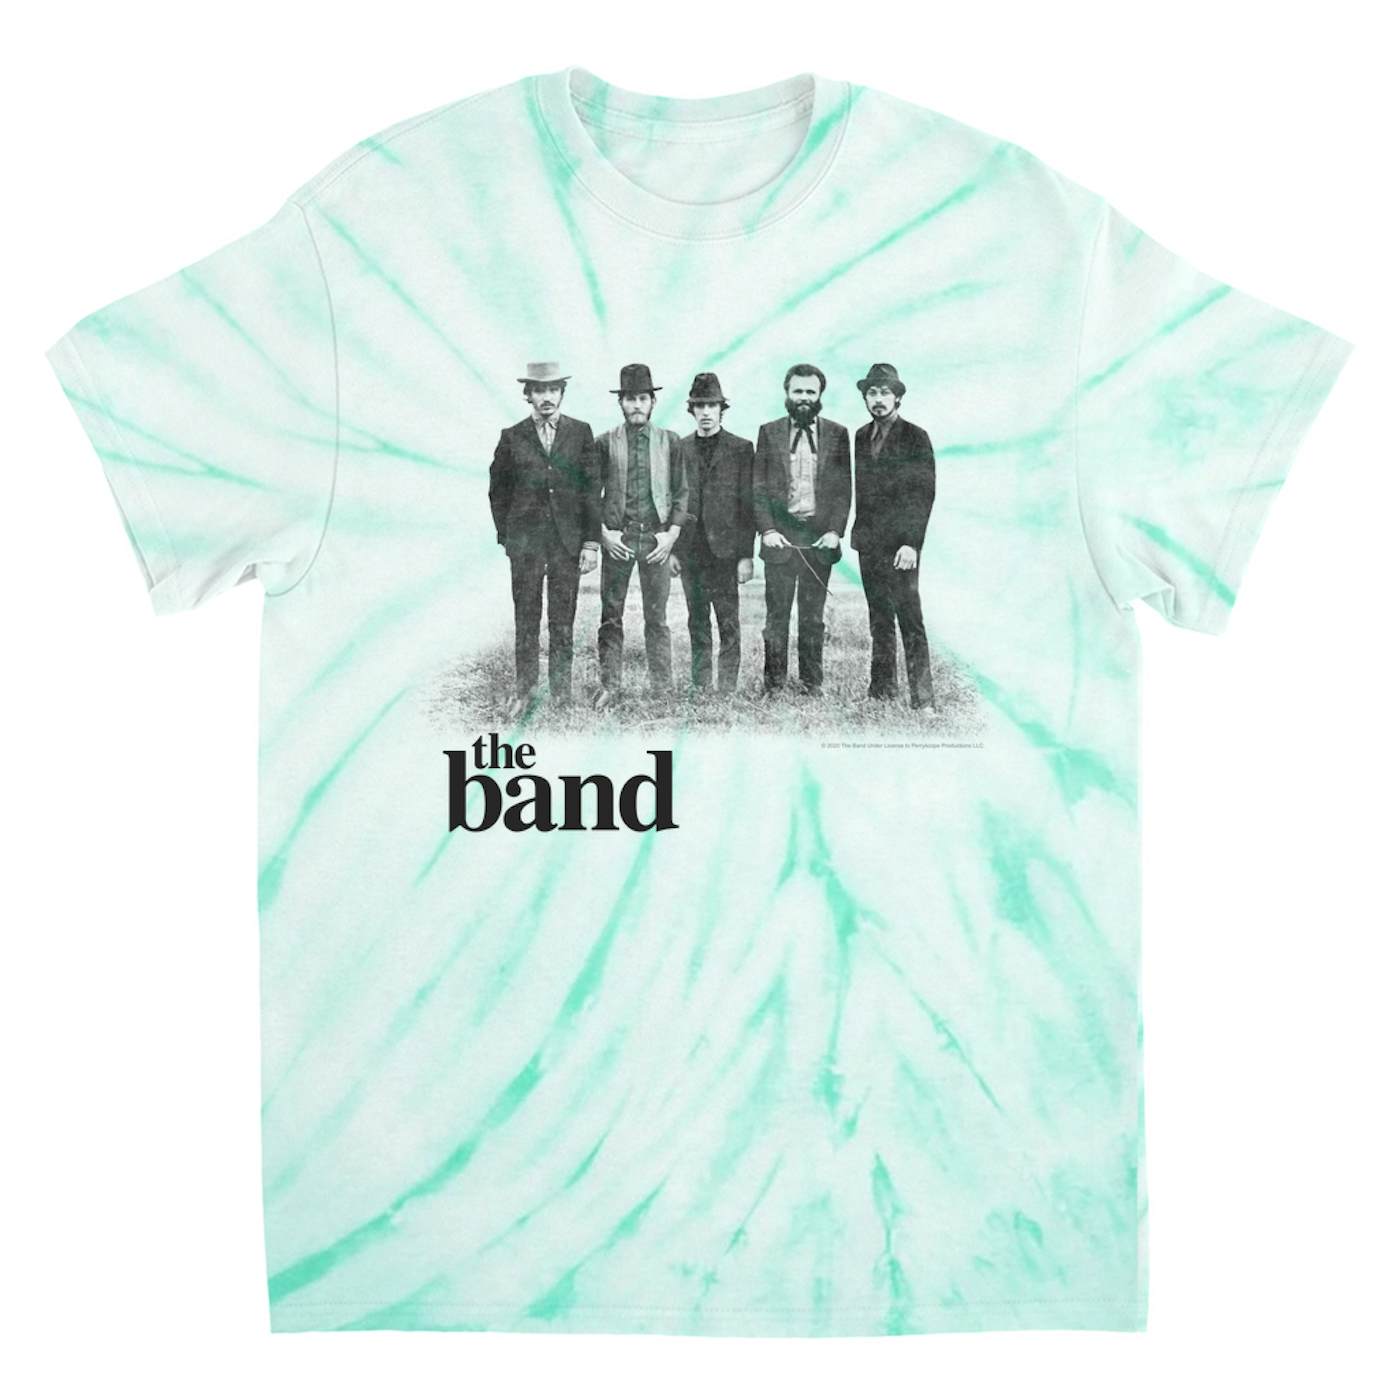 The Band T-Shirt | The Band Group Photo The Band Tie Dye Shirt